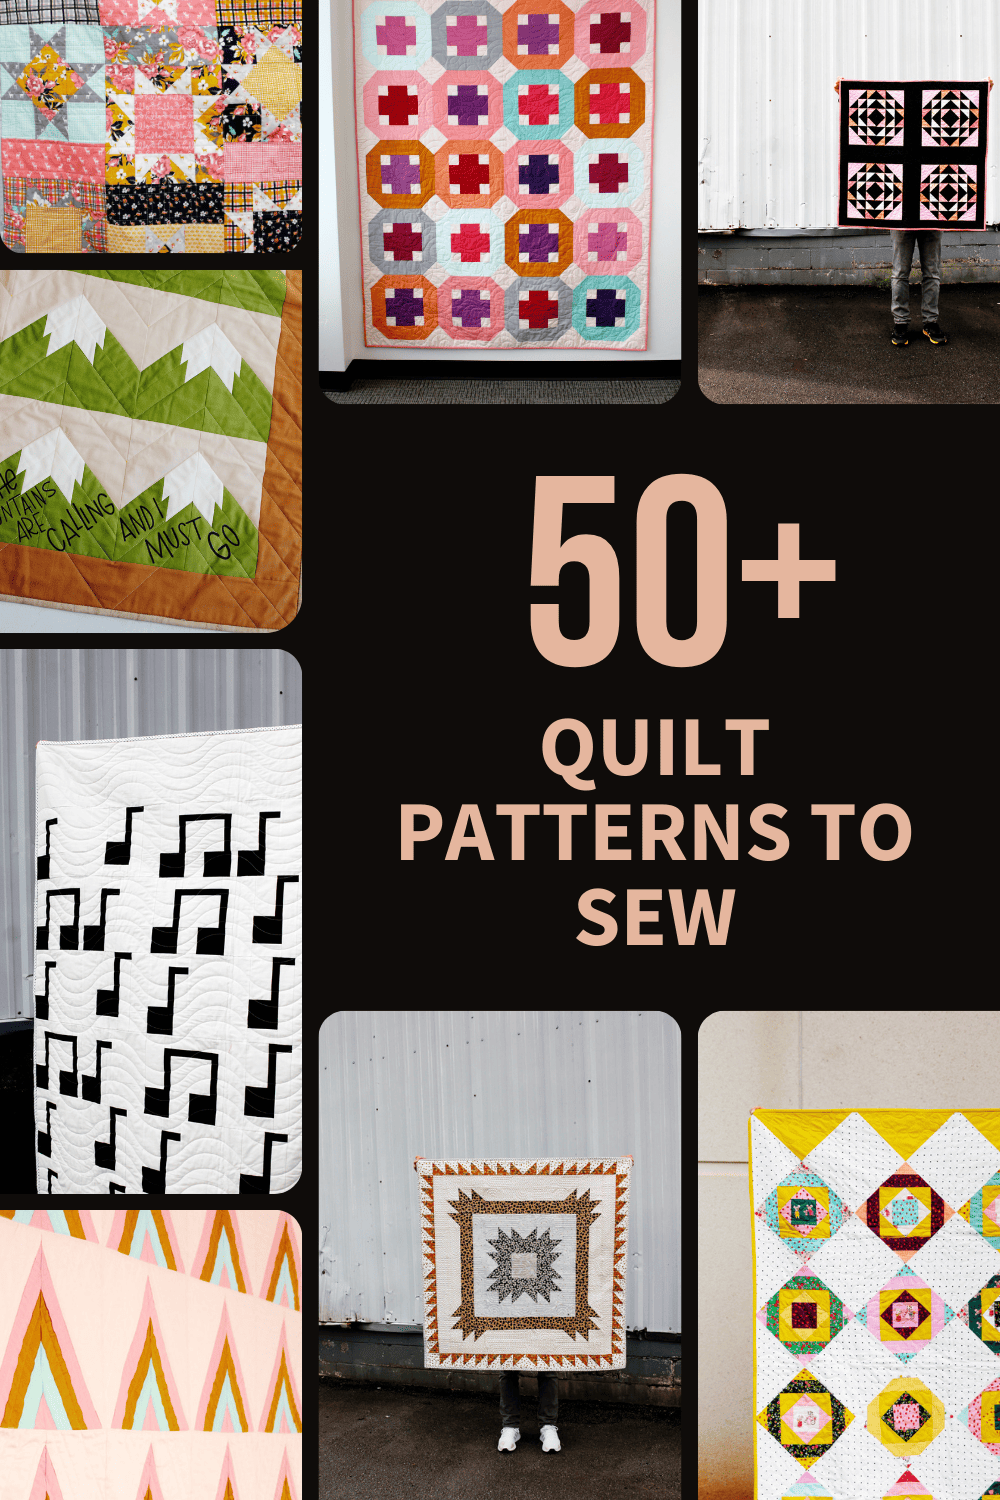 45 Free Quilt Patterns for Beginners  Quilting designs patterns, Quilt  sewing patterns, Quilt patterns free